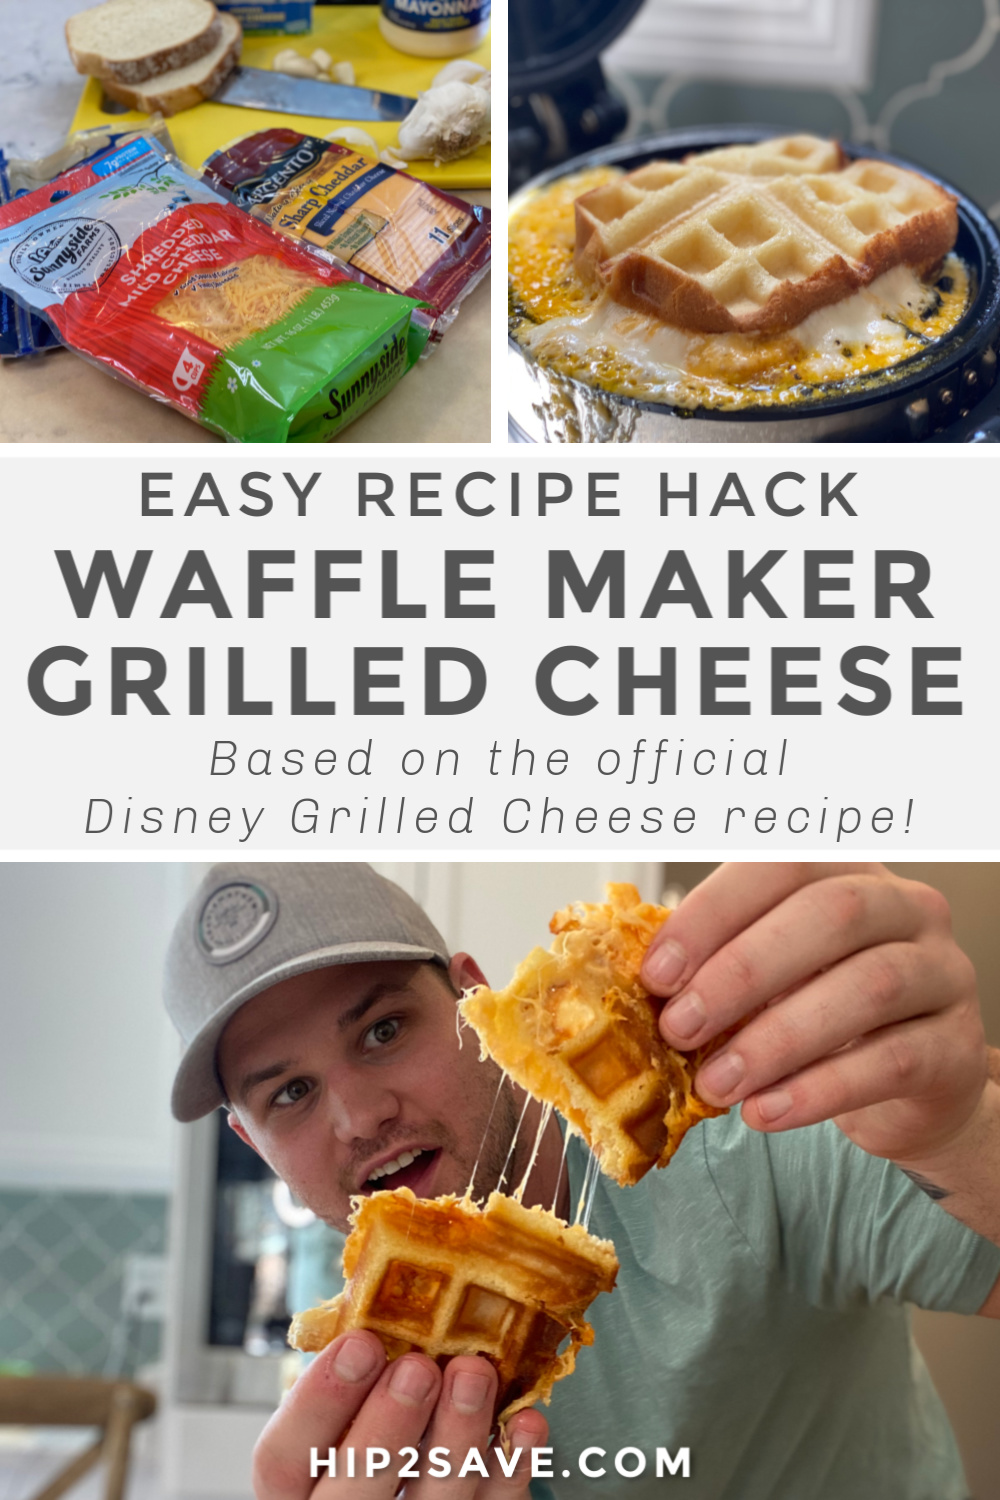 https://hip2save.com/wp-content/uploads/2020/04/disney-grilled-cheese-hack-pinterest.jpg?fit=1000%2C1500&strip=all